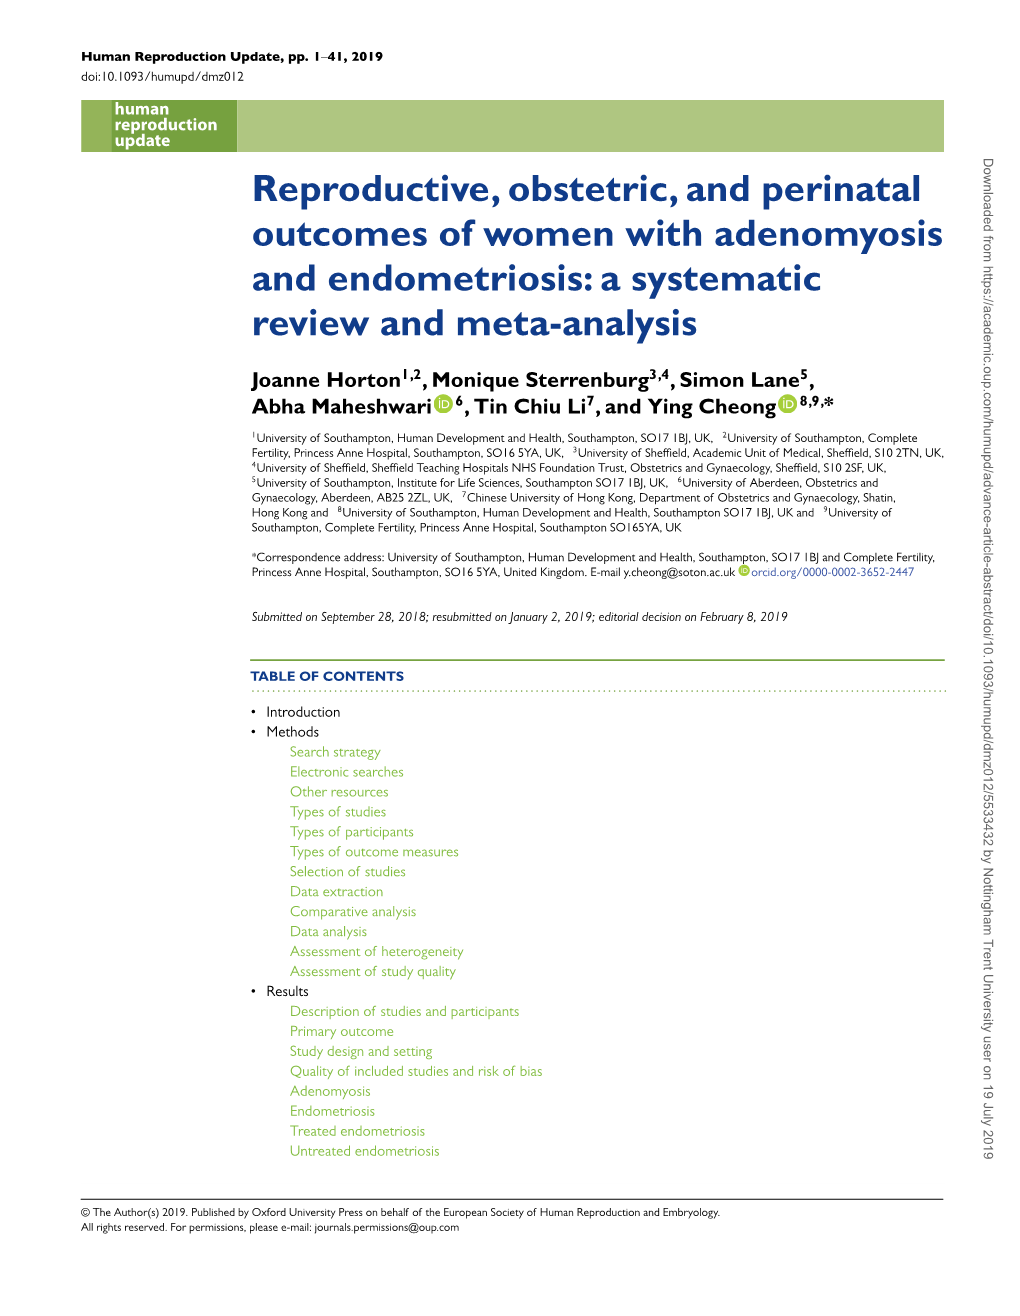 Reproductive, Obstetric, and Perinatal Outcomes of Women with Adenomyosis and Endometriosis: a Systematic Review and Meta-Analysis